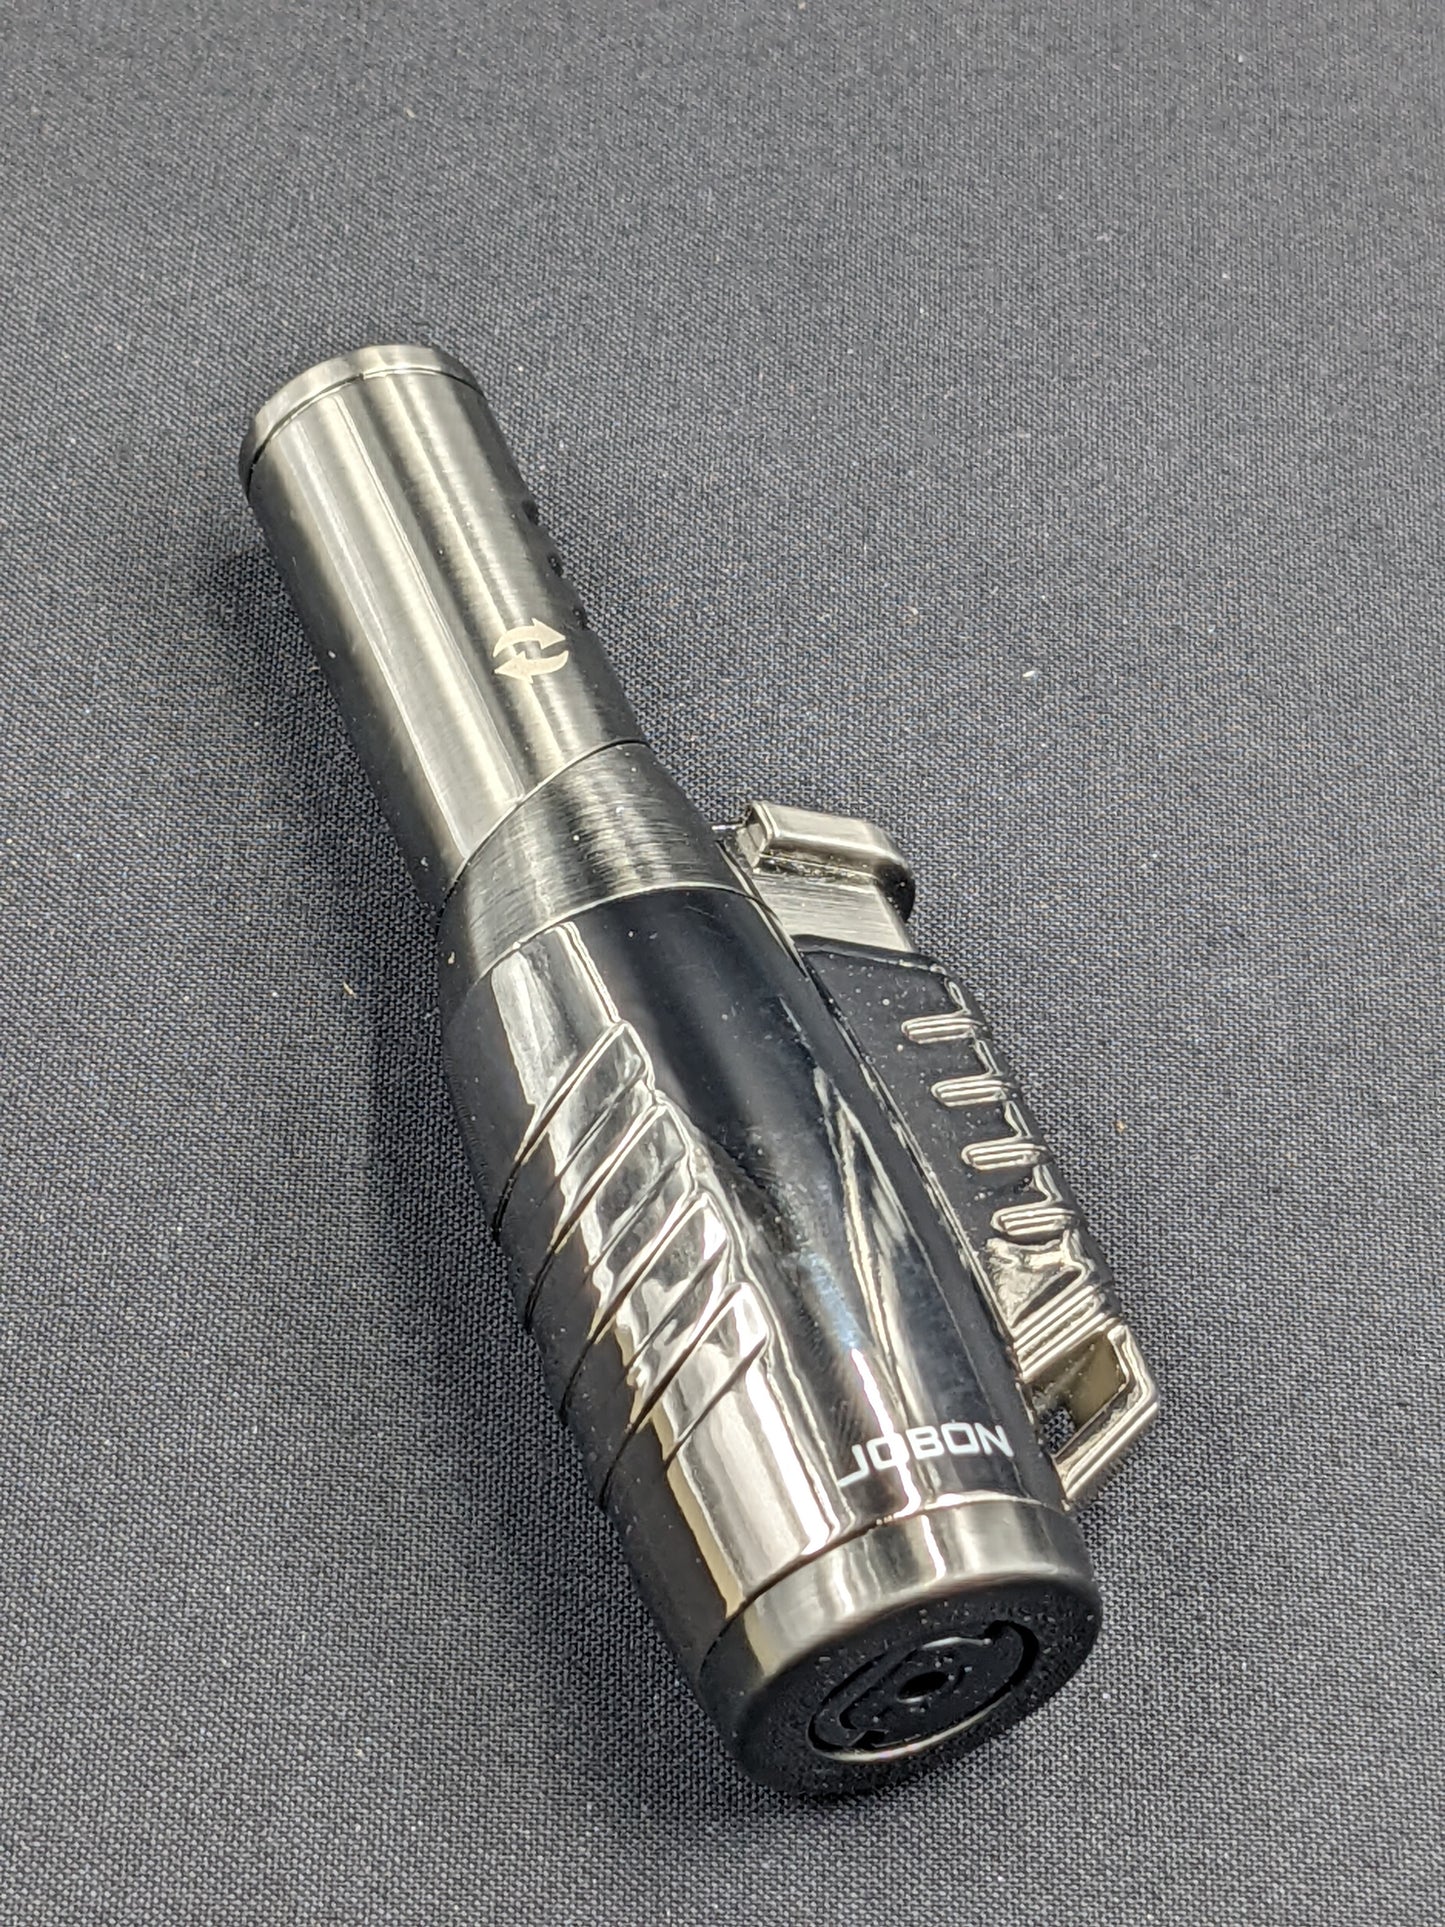 Jobon 3 Jet Torch Butane Lighter with Adjustable Nozzle - Silver